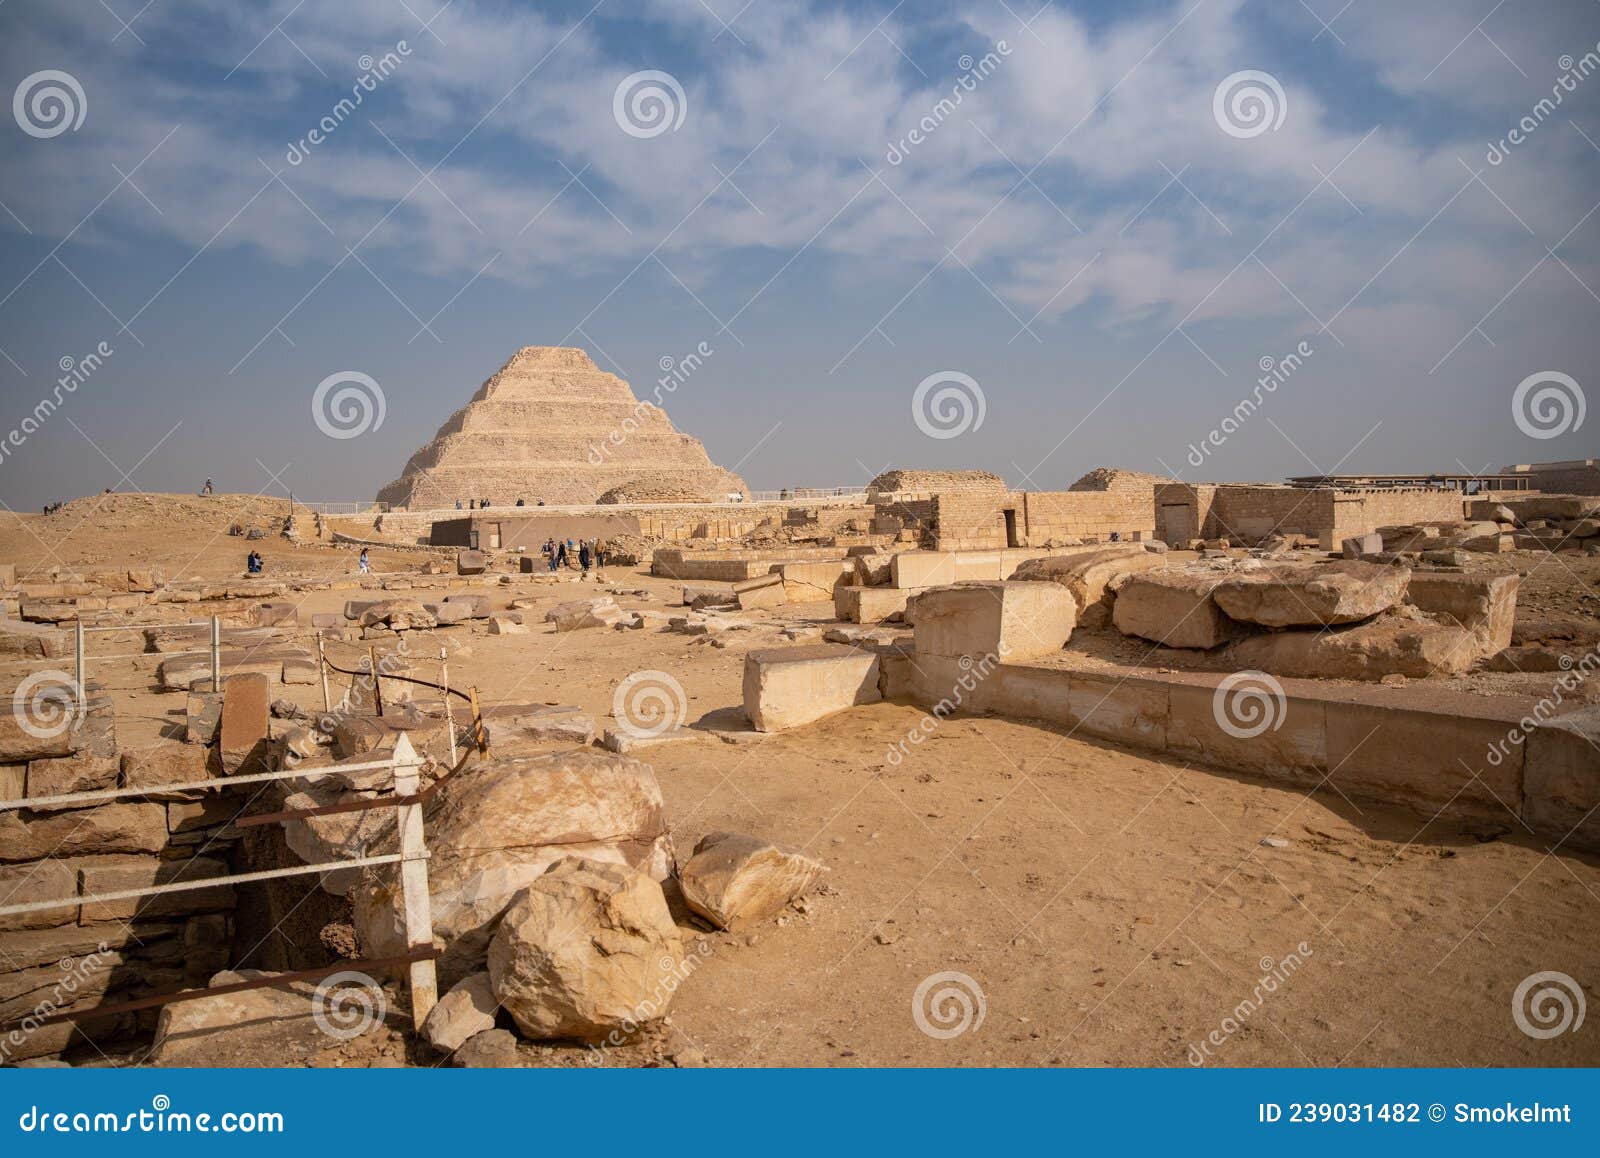 view to step pyramid of djoser in saqqara from pyramid of unas, an archeological remain in the saqqara necropolis, egypt